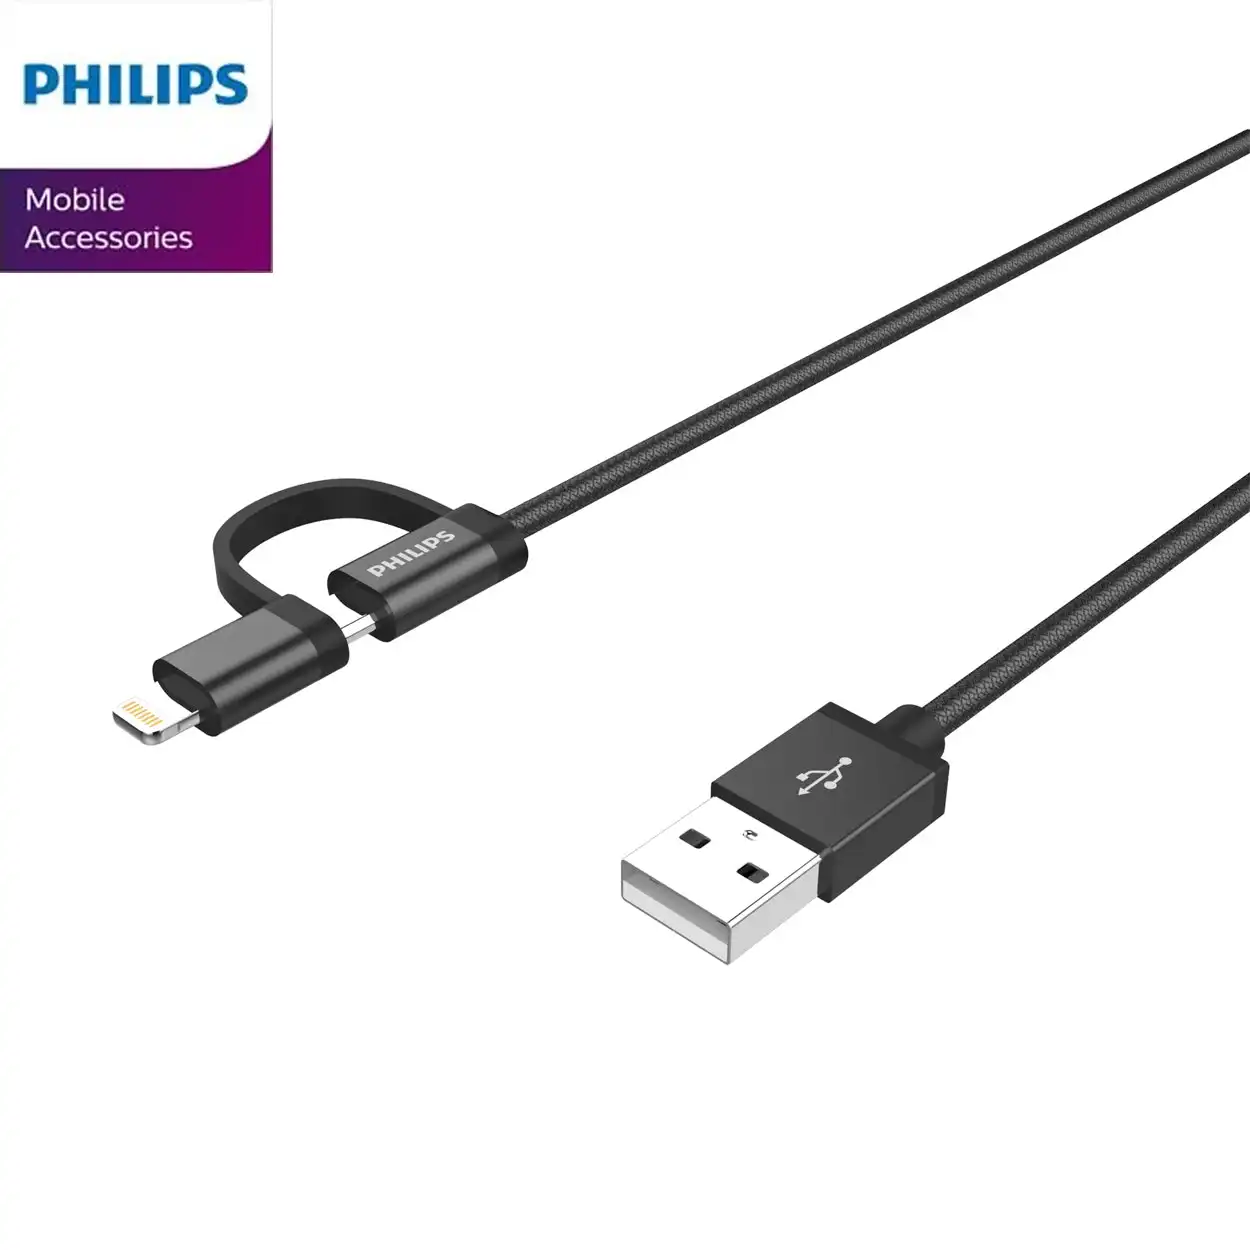 Philips 2-in-1 USB A to Micro and Lightning, Braided cable, 1.2m Black